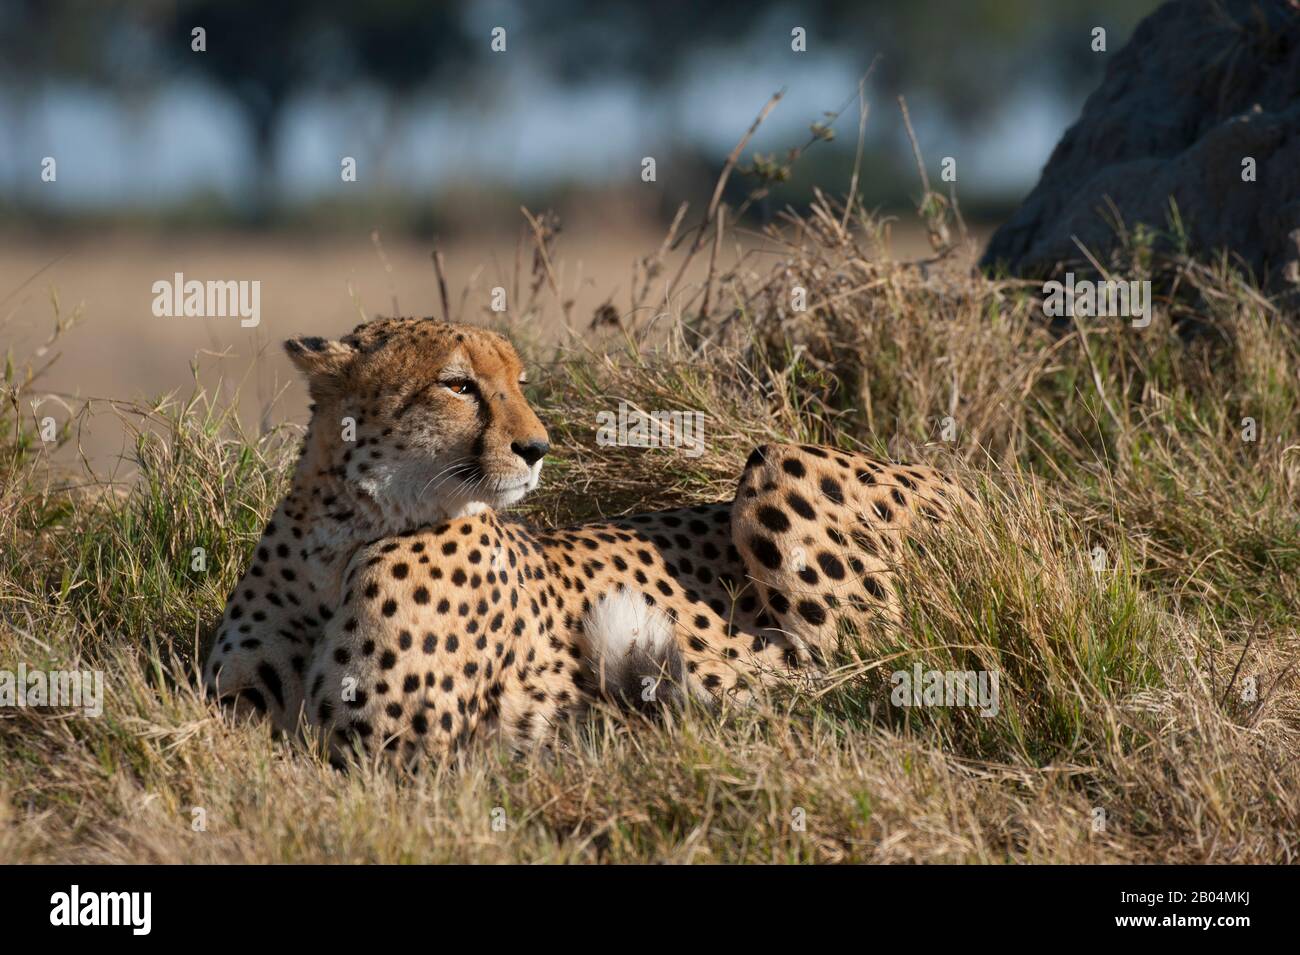 A Cheetah (Acinonyx jubatus) laying in grass in the Chitabe area of the Okavango Delta in the northern part of Botswana. Stock Photo